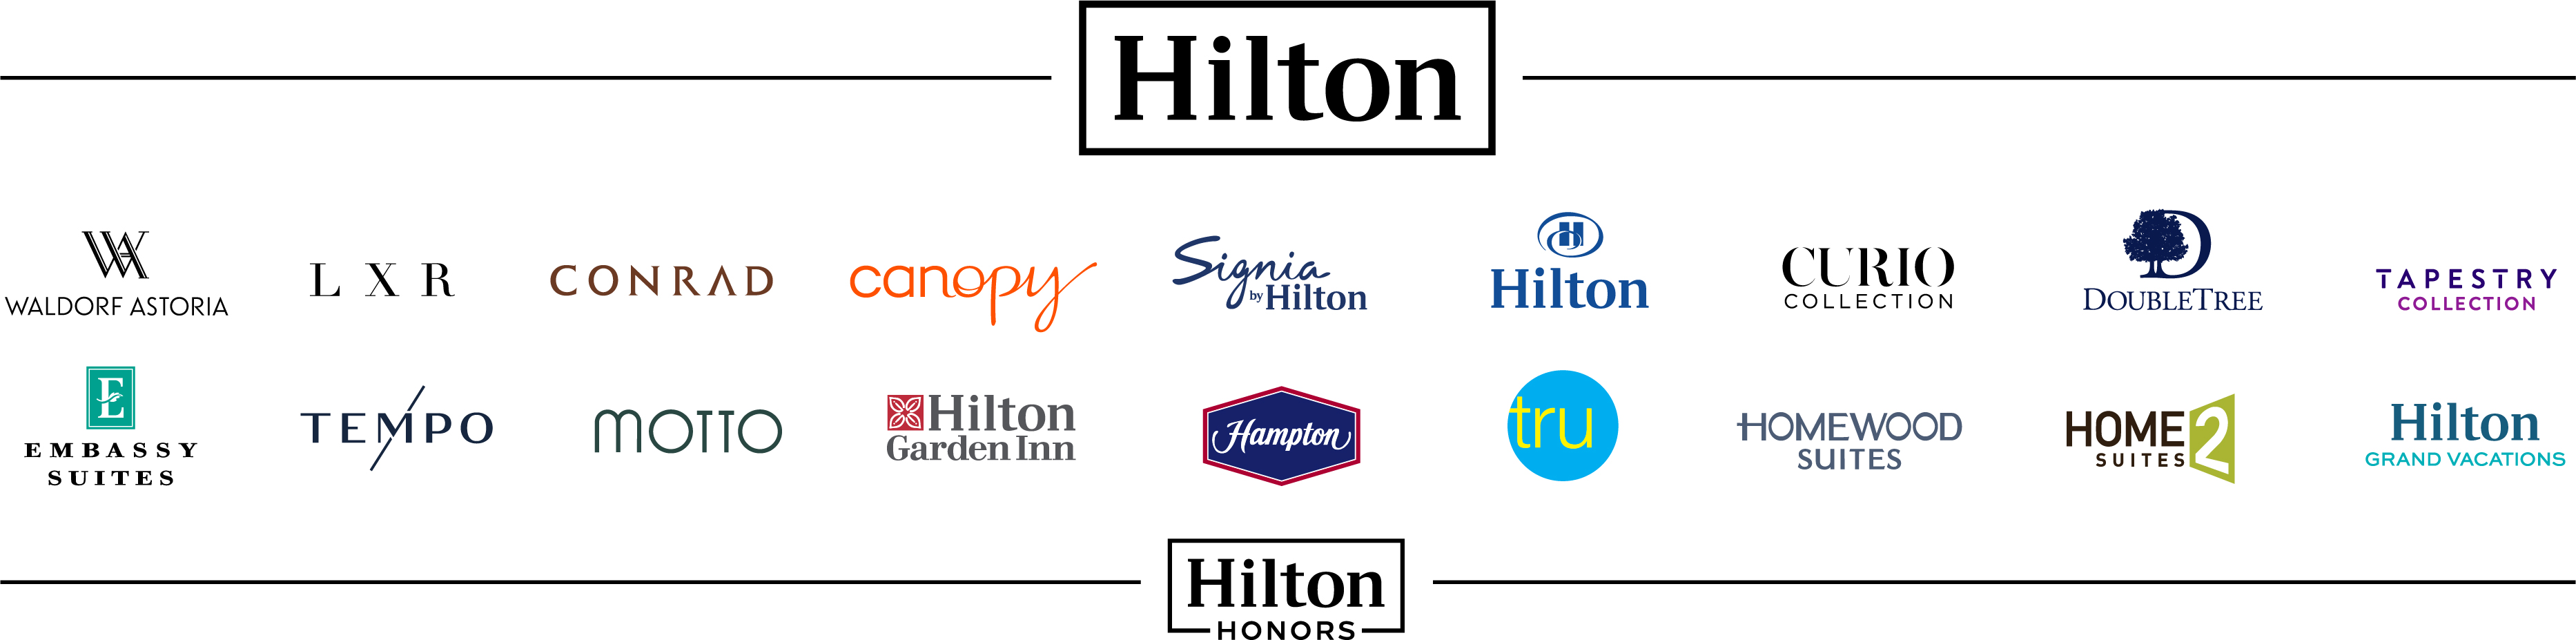 Hilton Luxury Brands to Open Seven Hotels by End of 2019